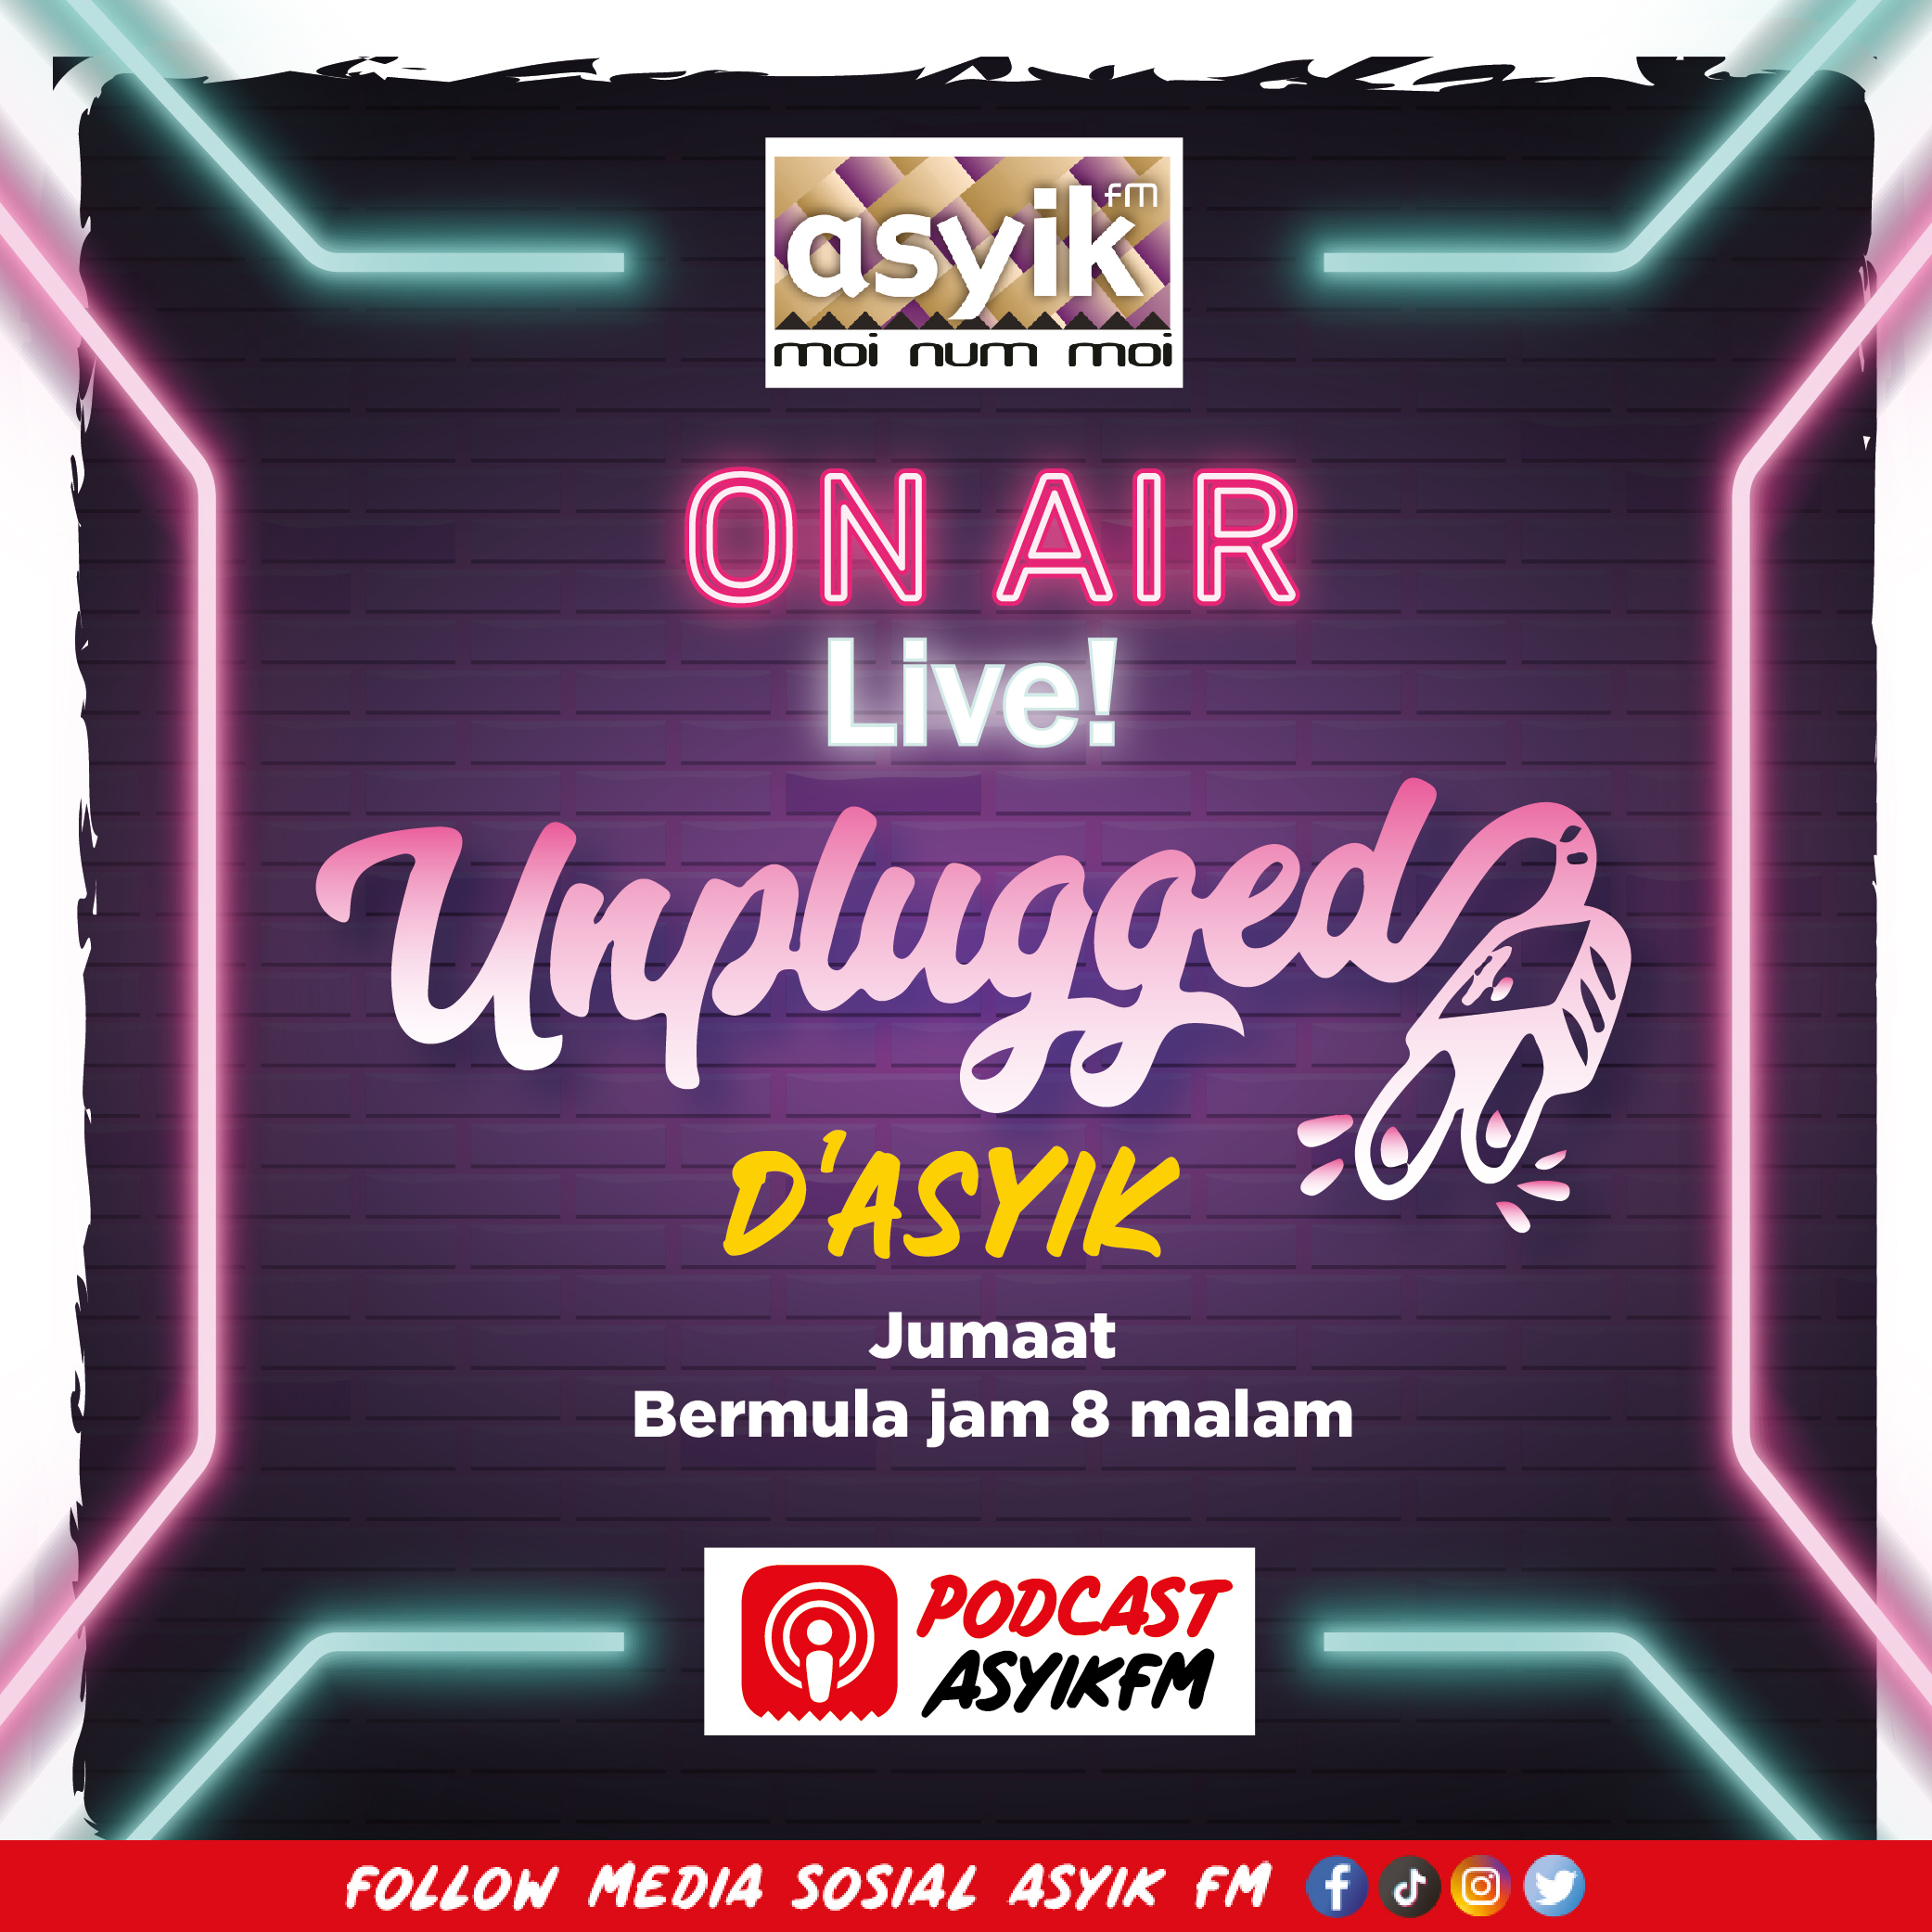 On Air Live! Unplugged D Asyik